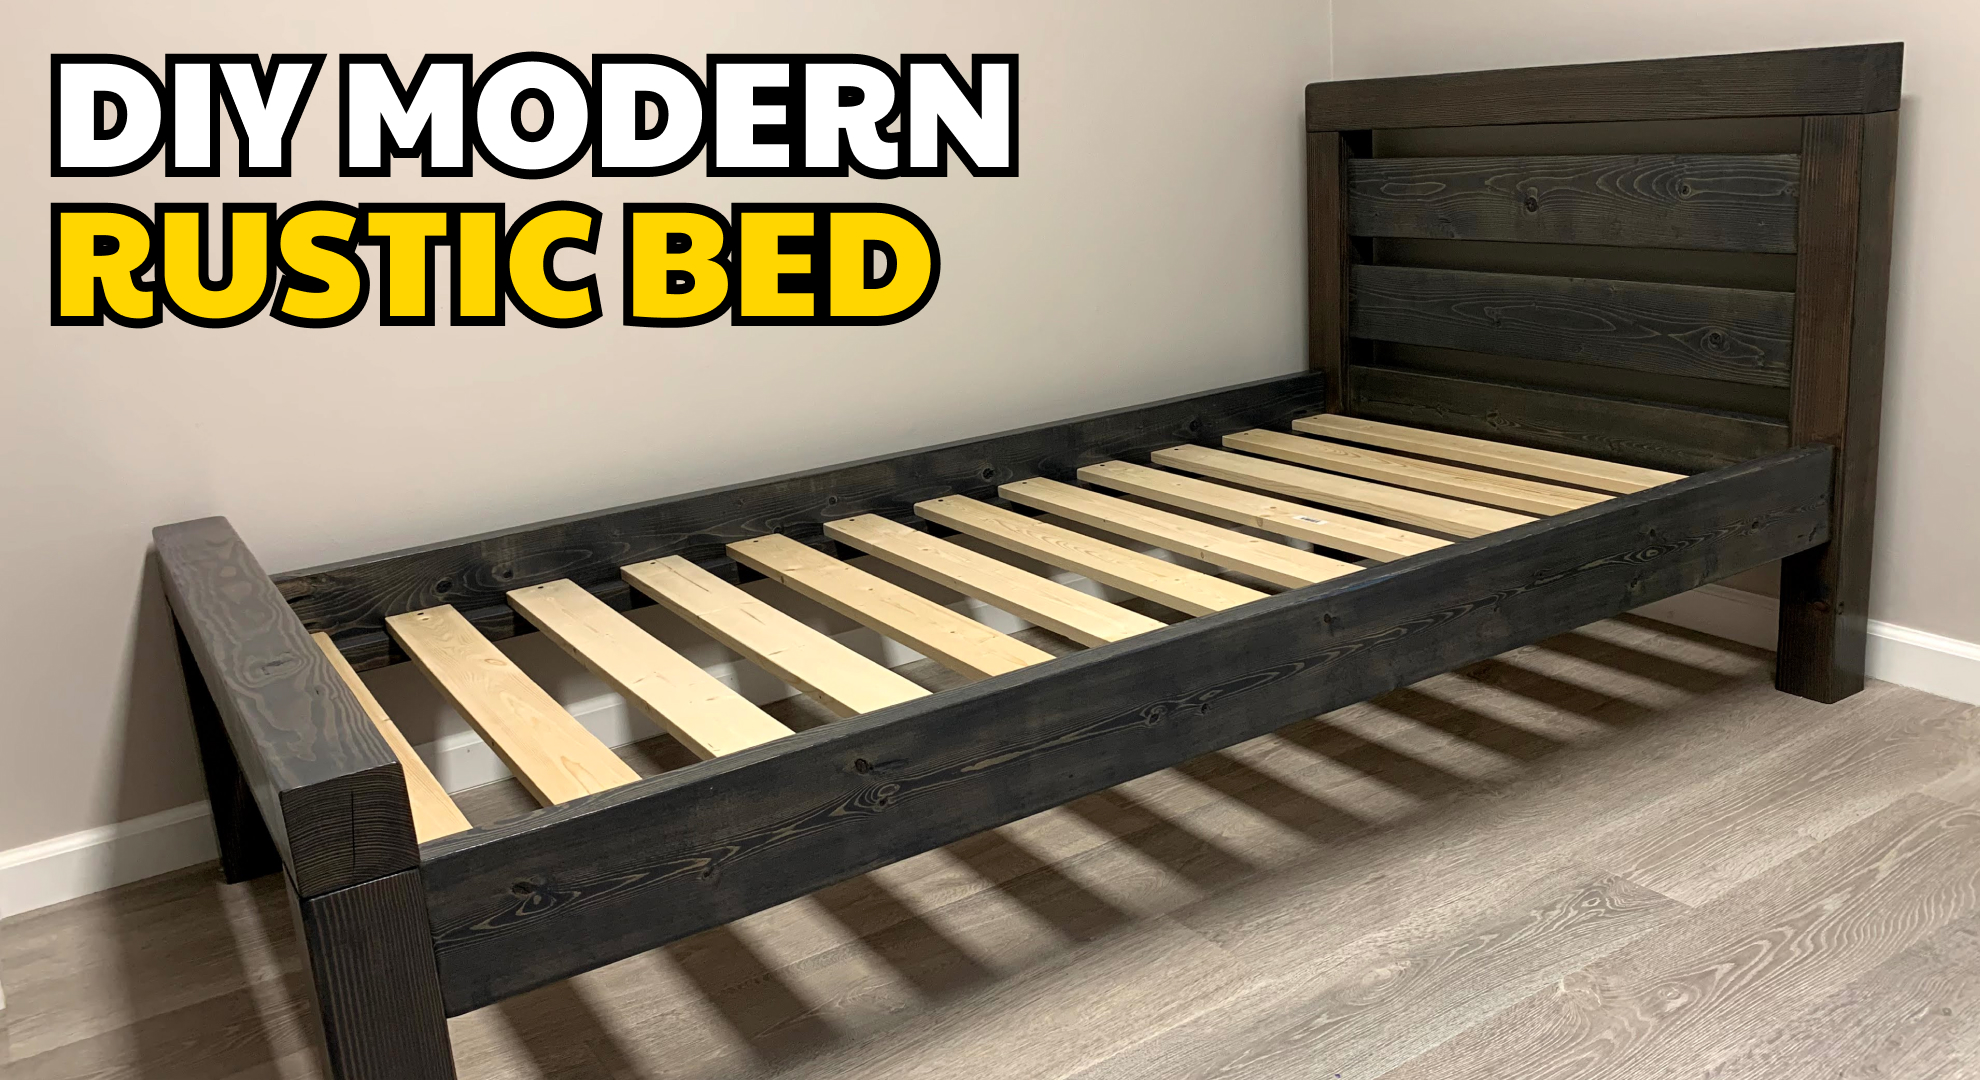 Discover how to create a sleek, budget-friendly platform bed frame with a modern twist. This versatile DIY project costs just $100 and is perfect for tight spaces. Join me for an easy, stylish, and affordable bedroom upgrade.